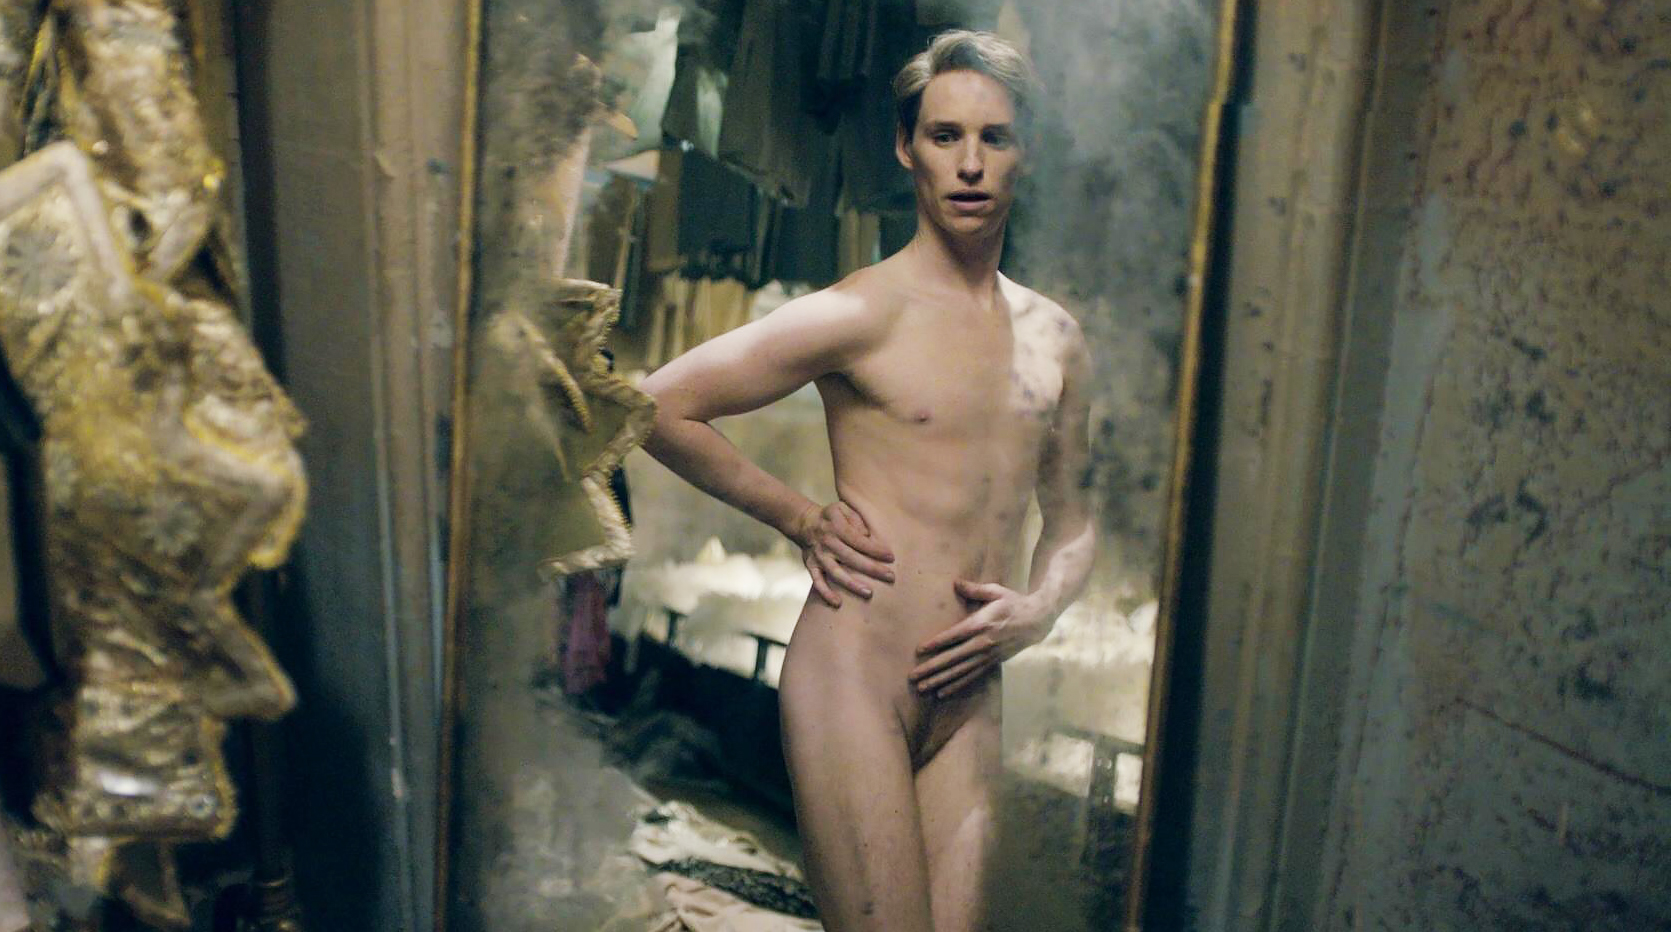 Unexpectedly – Eddie Redmayne Wouldn’t Like To Play The Transgender Again